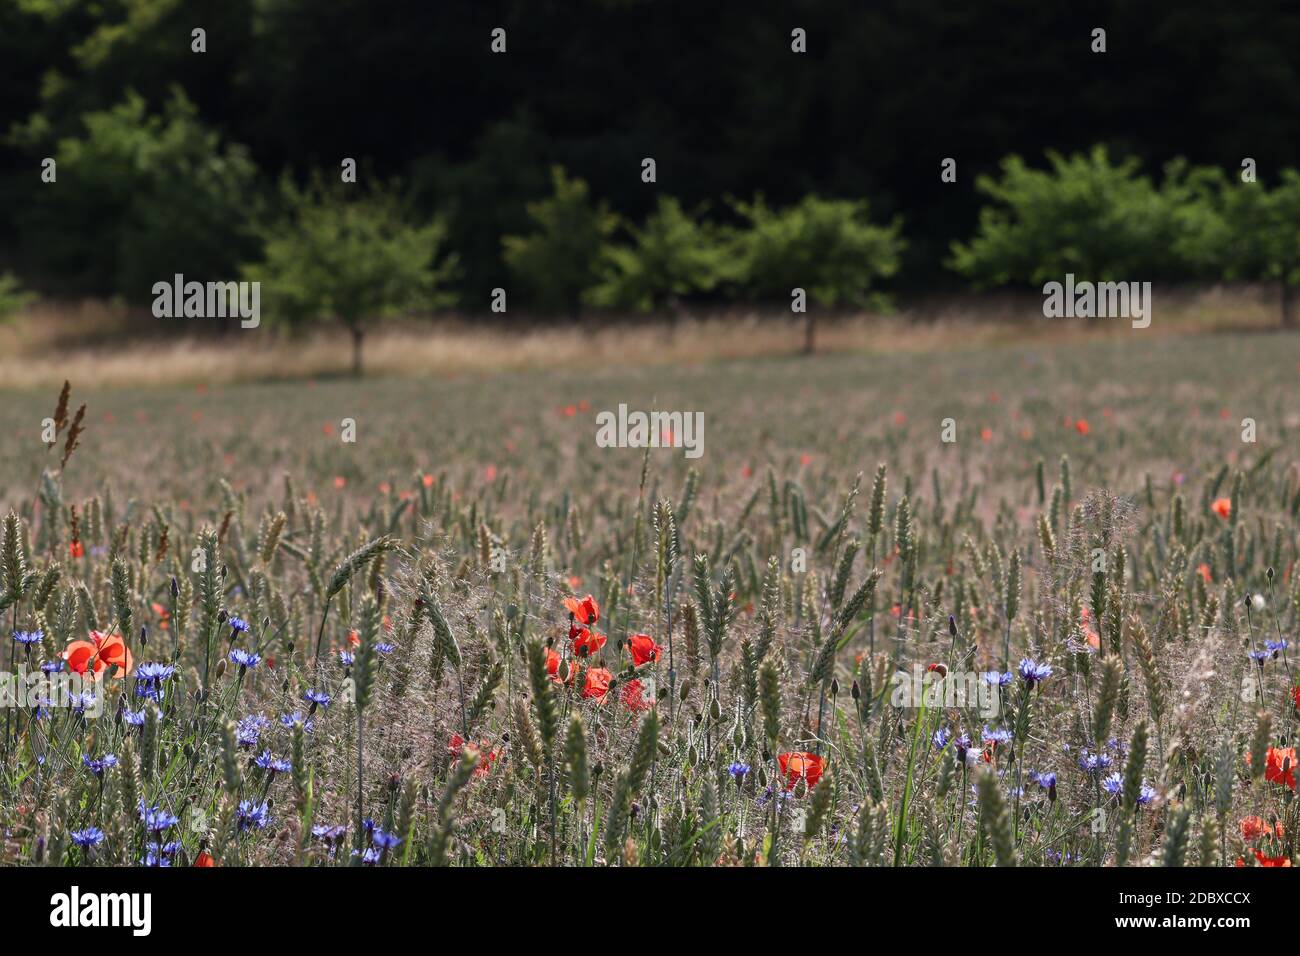 grain field with flowers Stock Photo